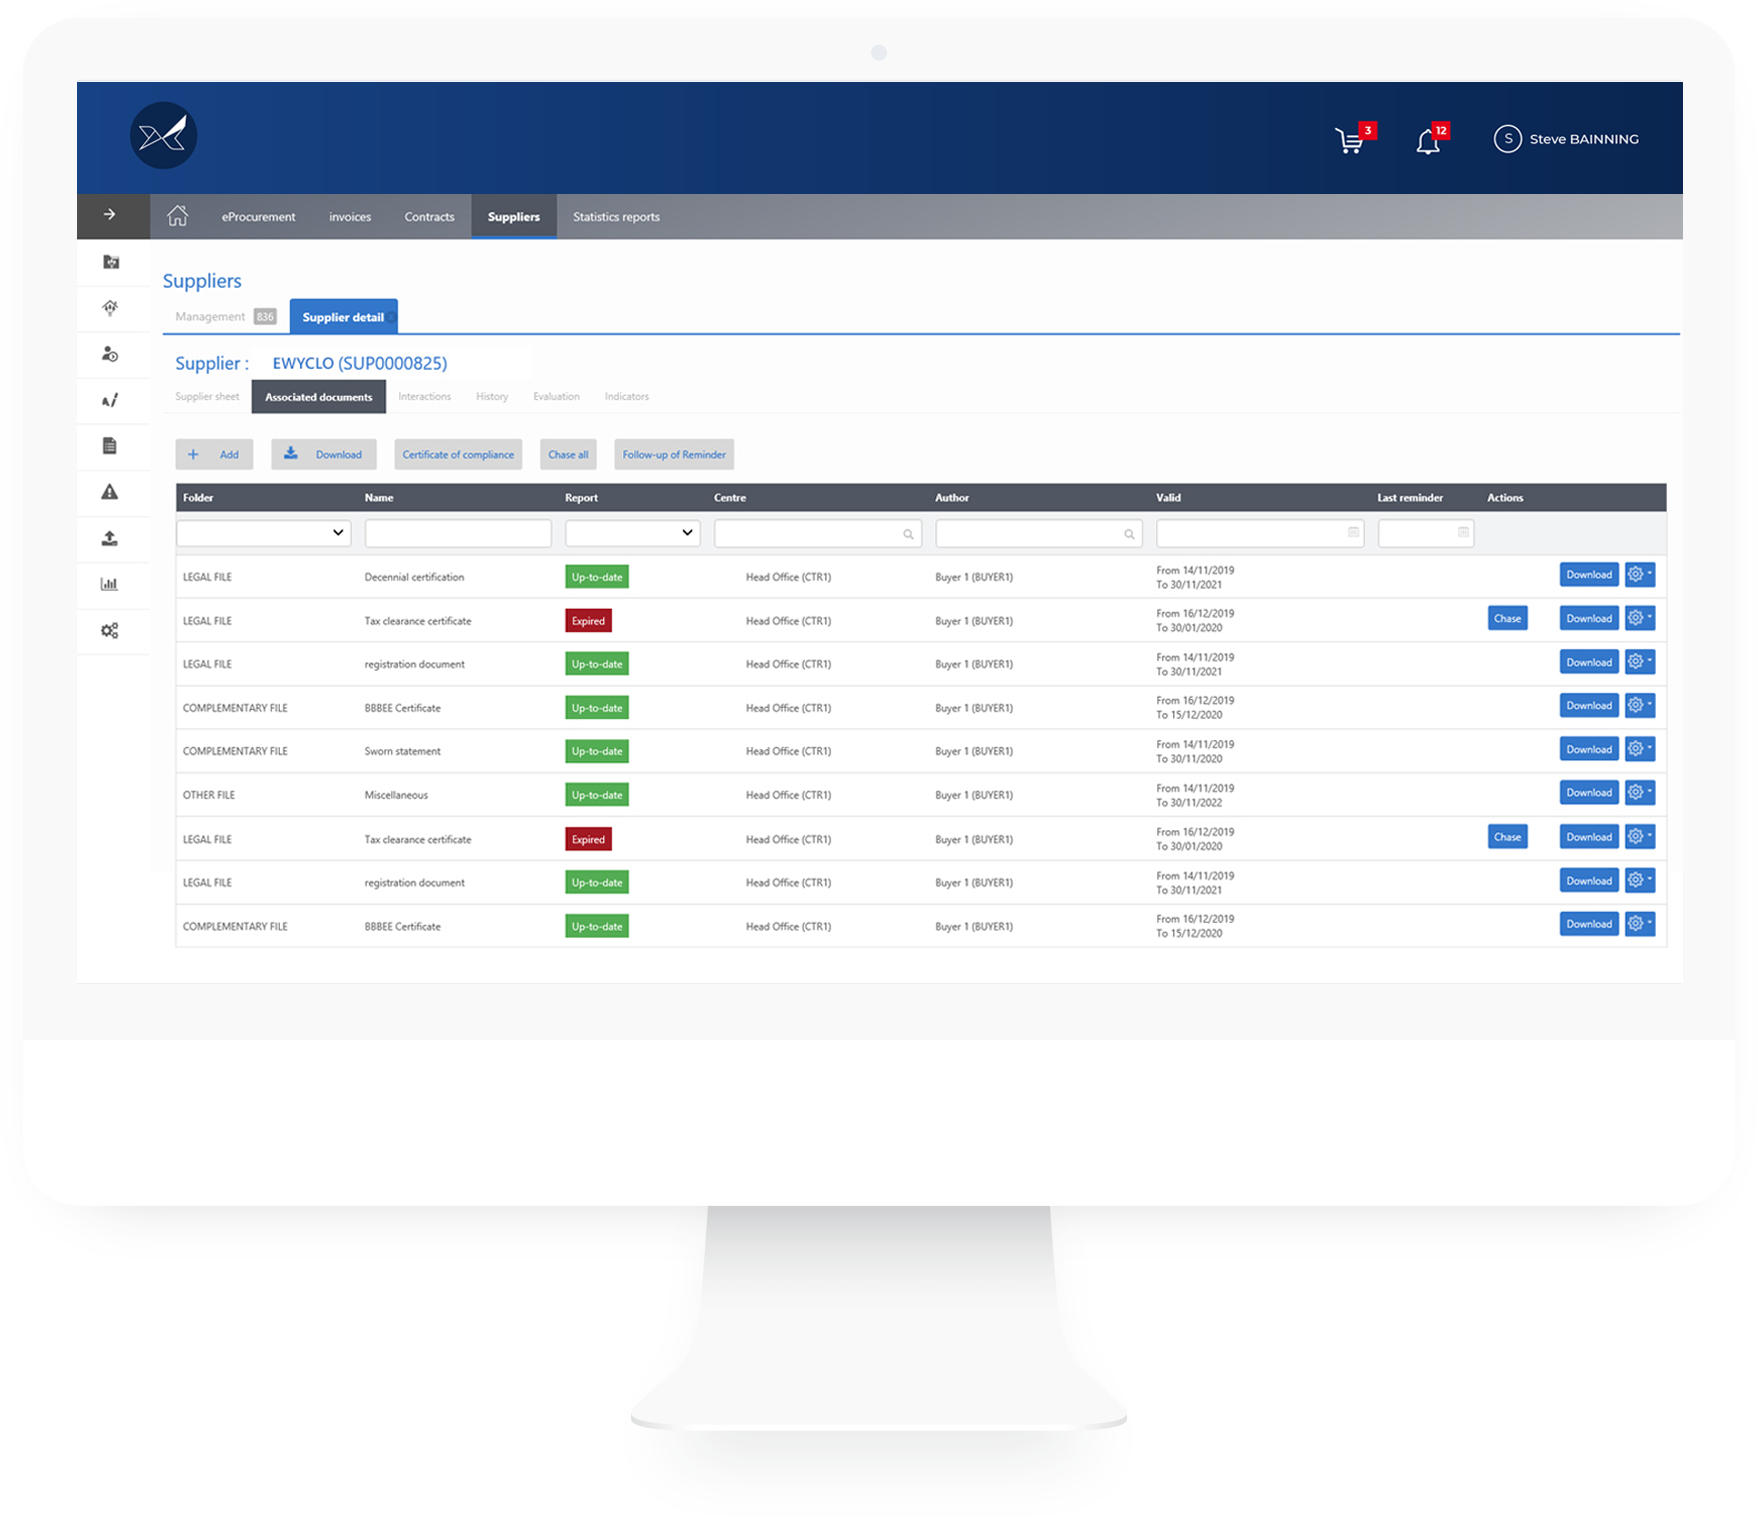 With the Oxalys supplier management software you benefit from a 360° view of supplier information.